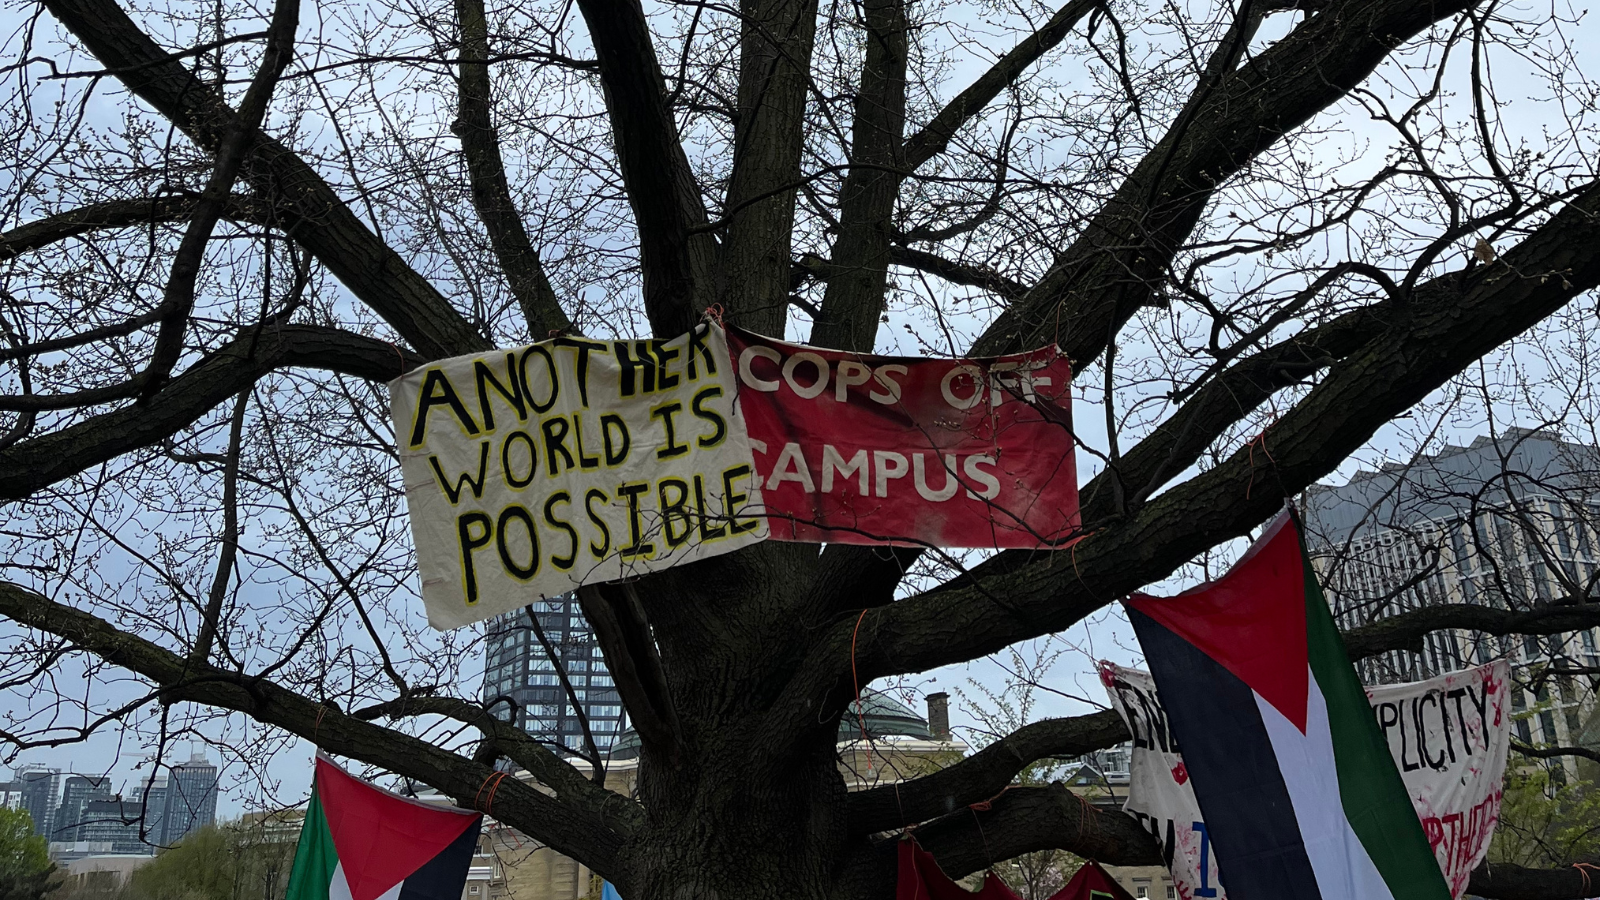 The Student Encampment Movement is Part of a History of Militant Struggle Against Settler Colonialism